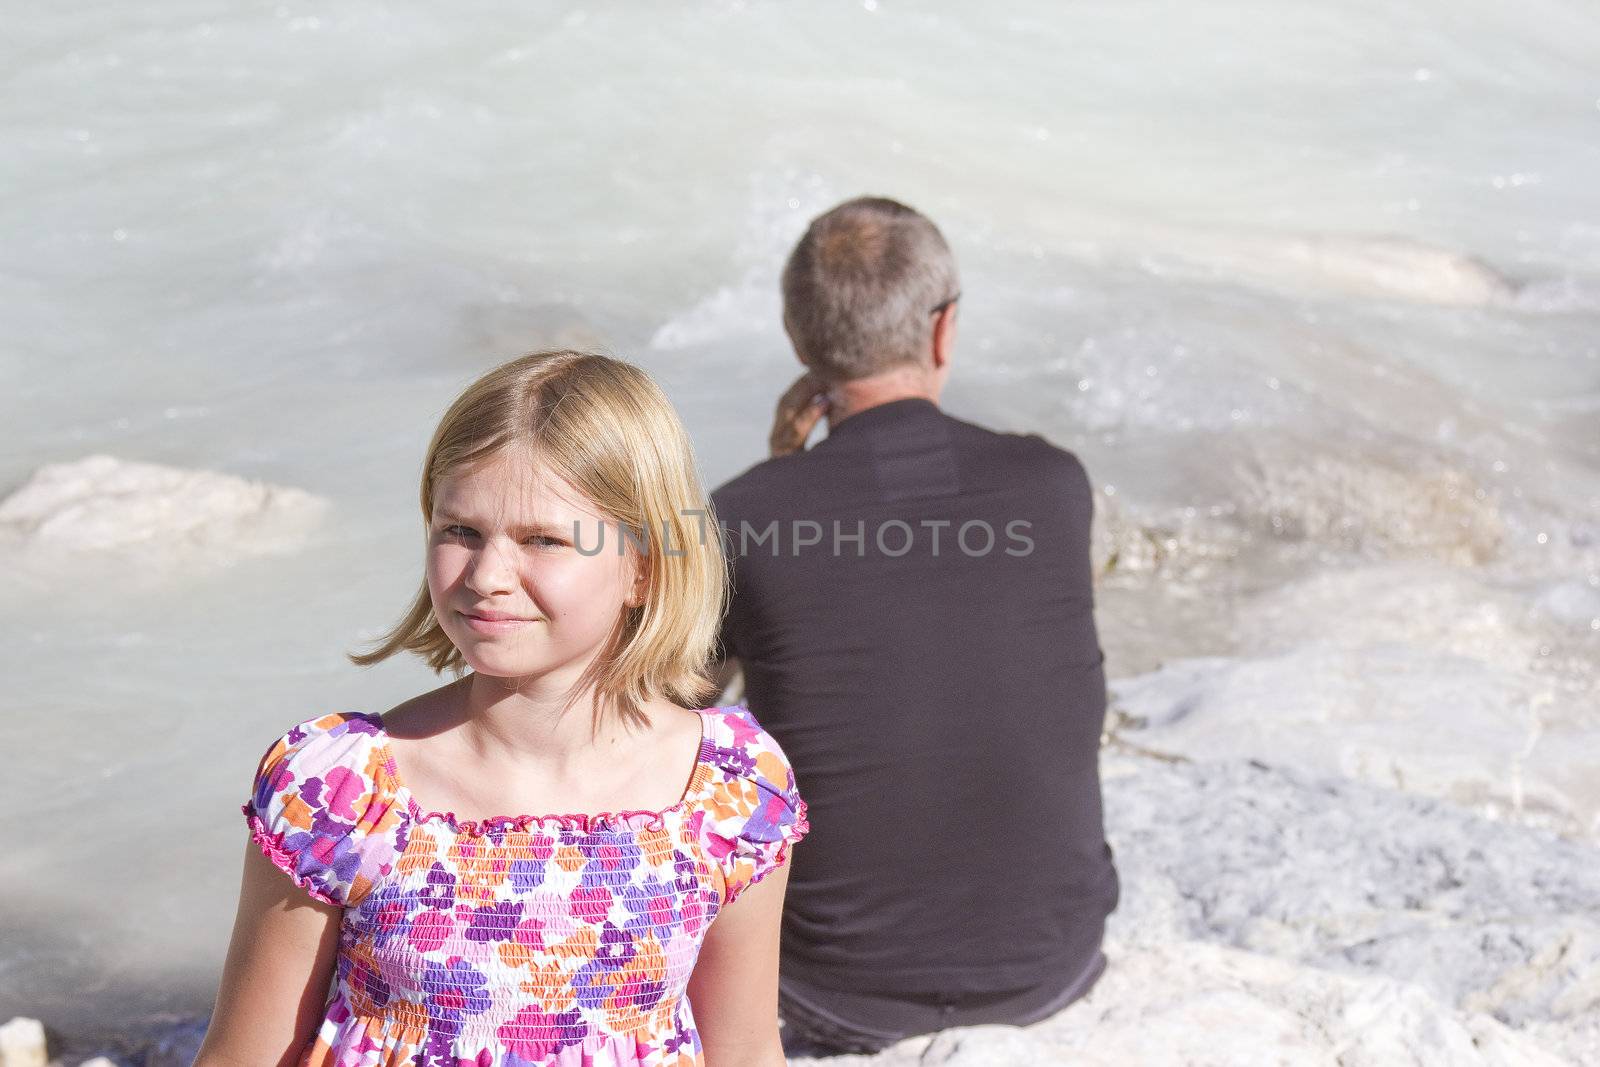 tourists resting on the river Soca in Slovenia by miradrozdowski